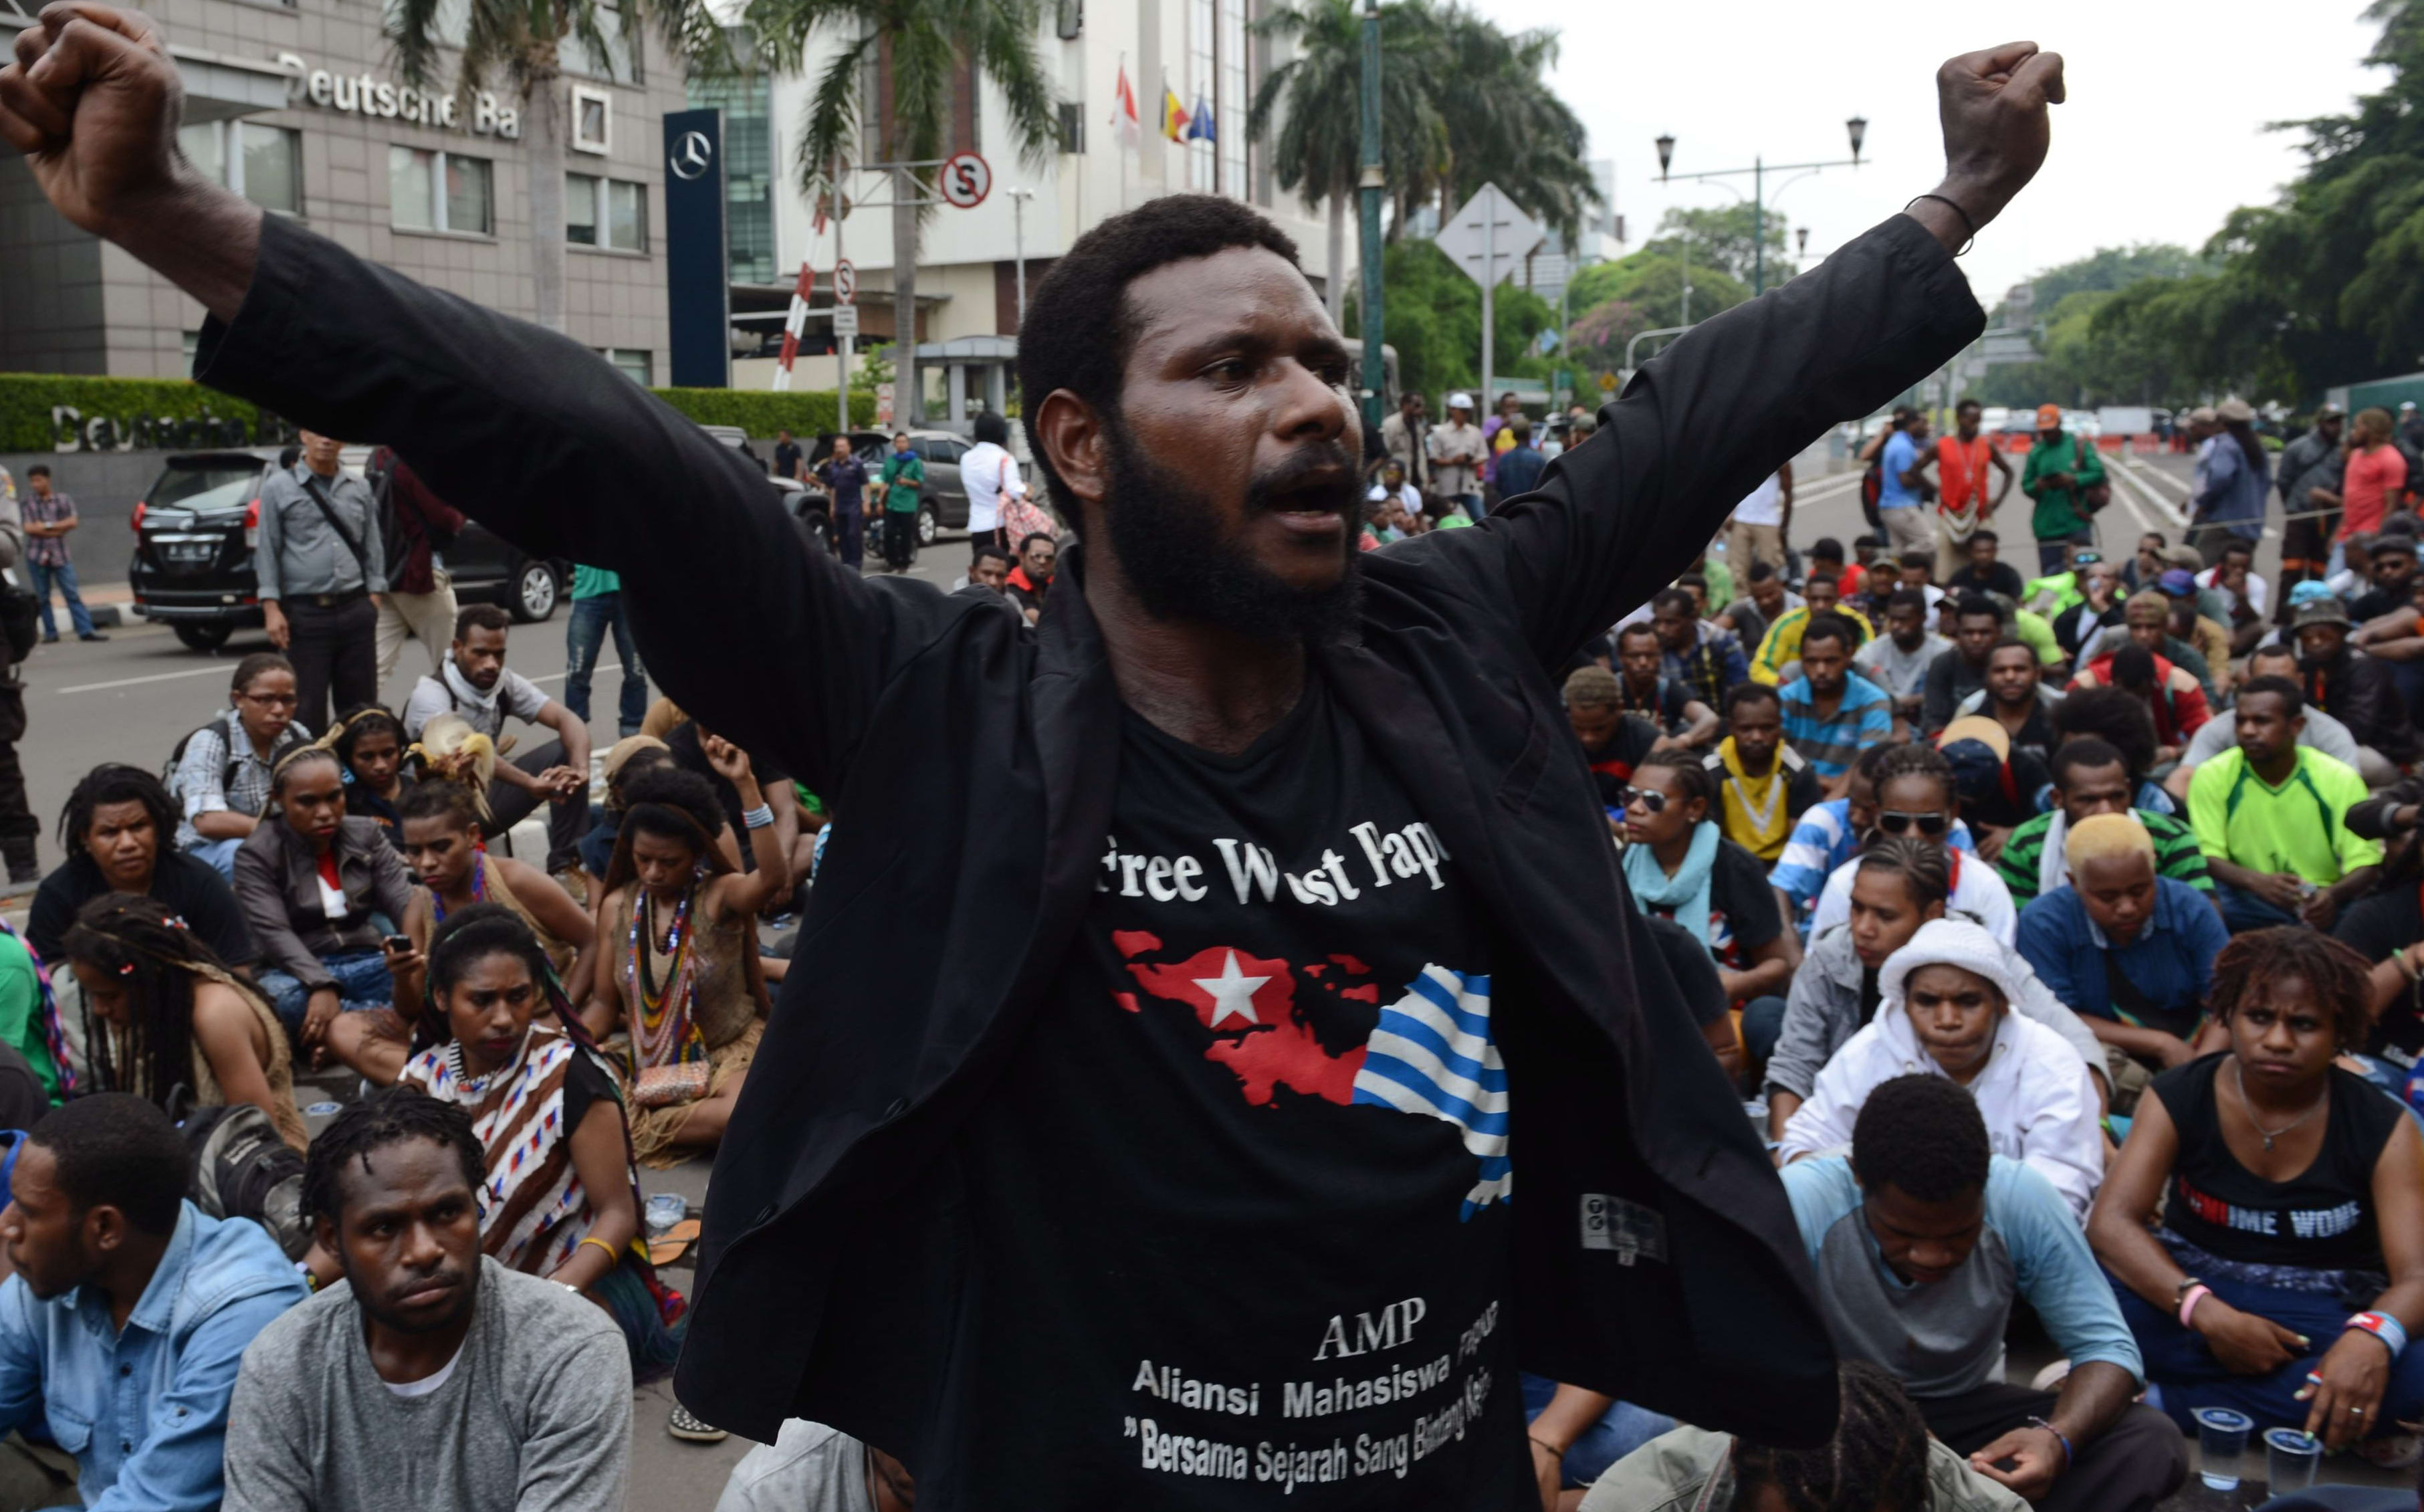 Papuan pro-independence demonstrators stage a protest in Jakarta on December 1, 2015, before police fired tear gas at a hundreds-strong crowd hurling rocks during a protest against Indonesian rule over the eastern region of Papua.